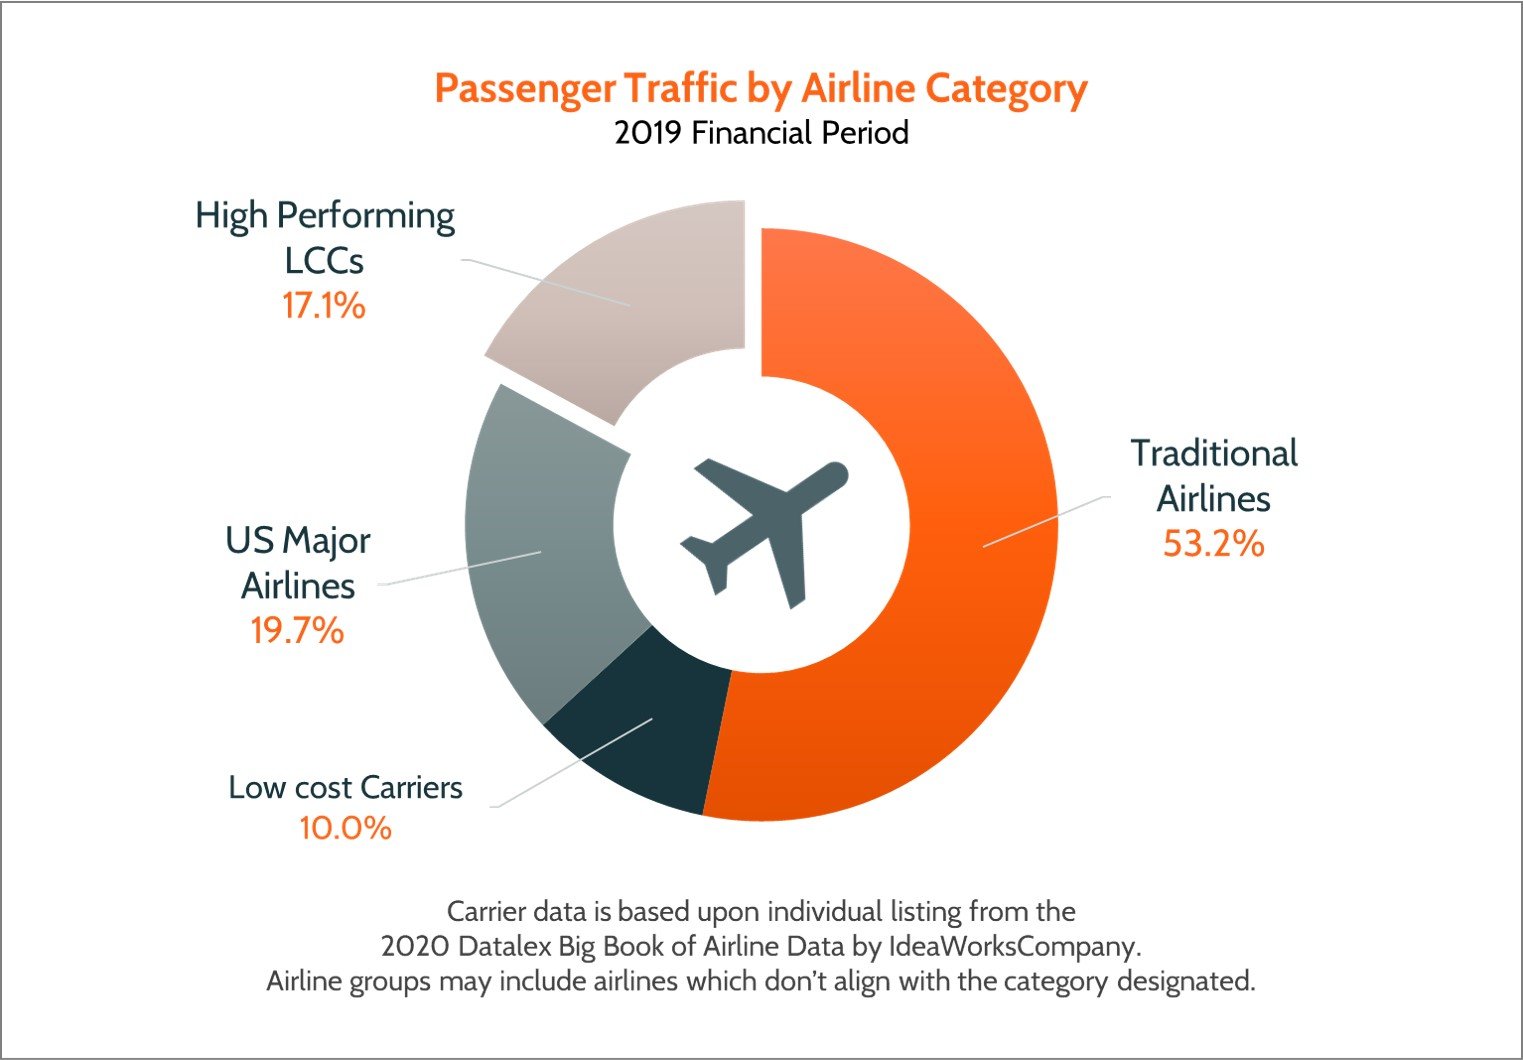 Passenger traffic by airline category